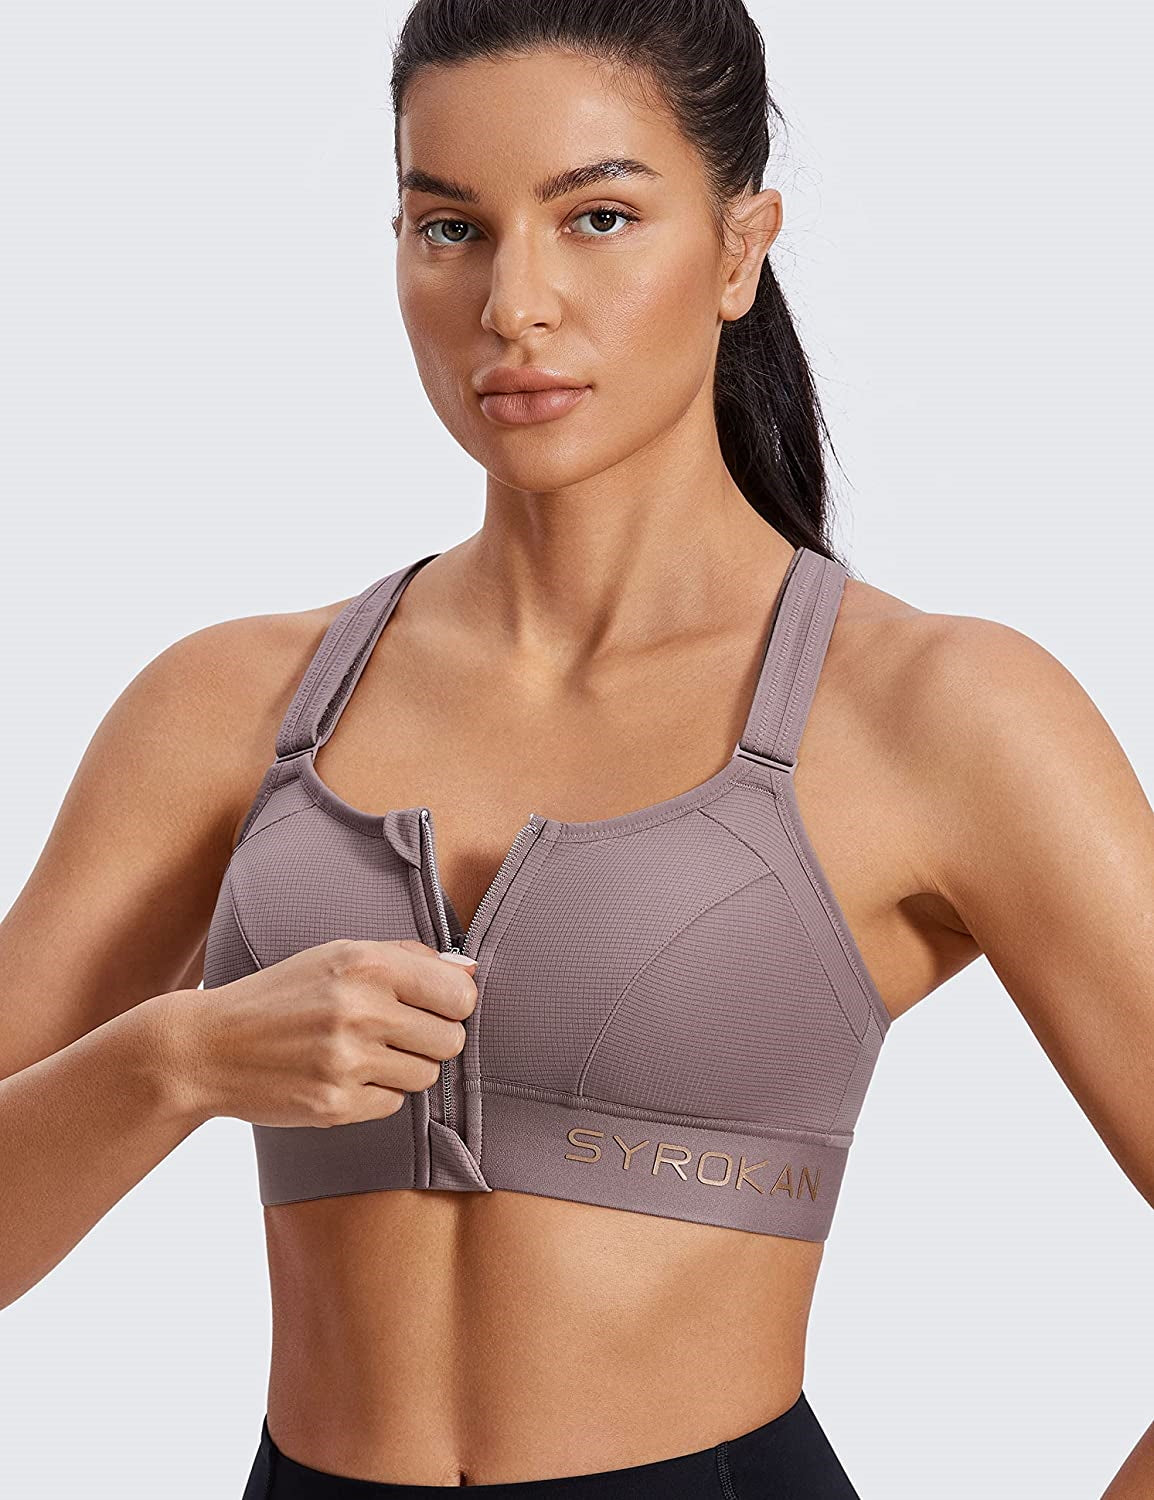 SYROKAN Women's Workout Sports Bra High Impact Support Bounce Control  Wirefree Mesh Racerback Top Apricot Large price in UAE,  UAE